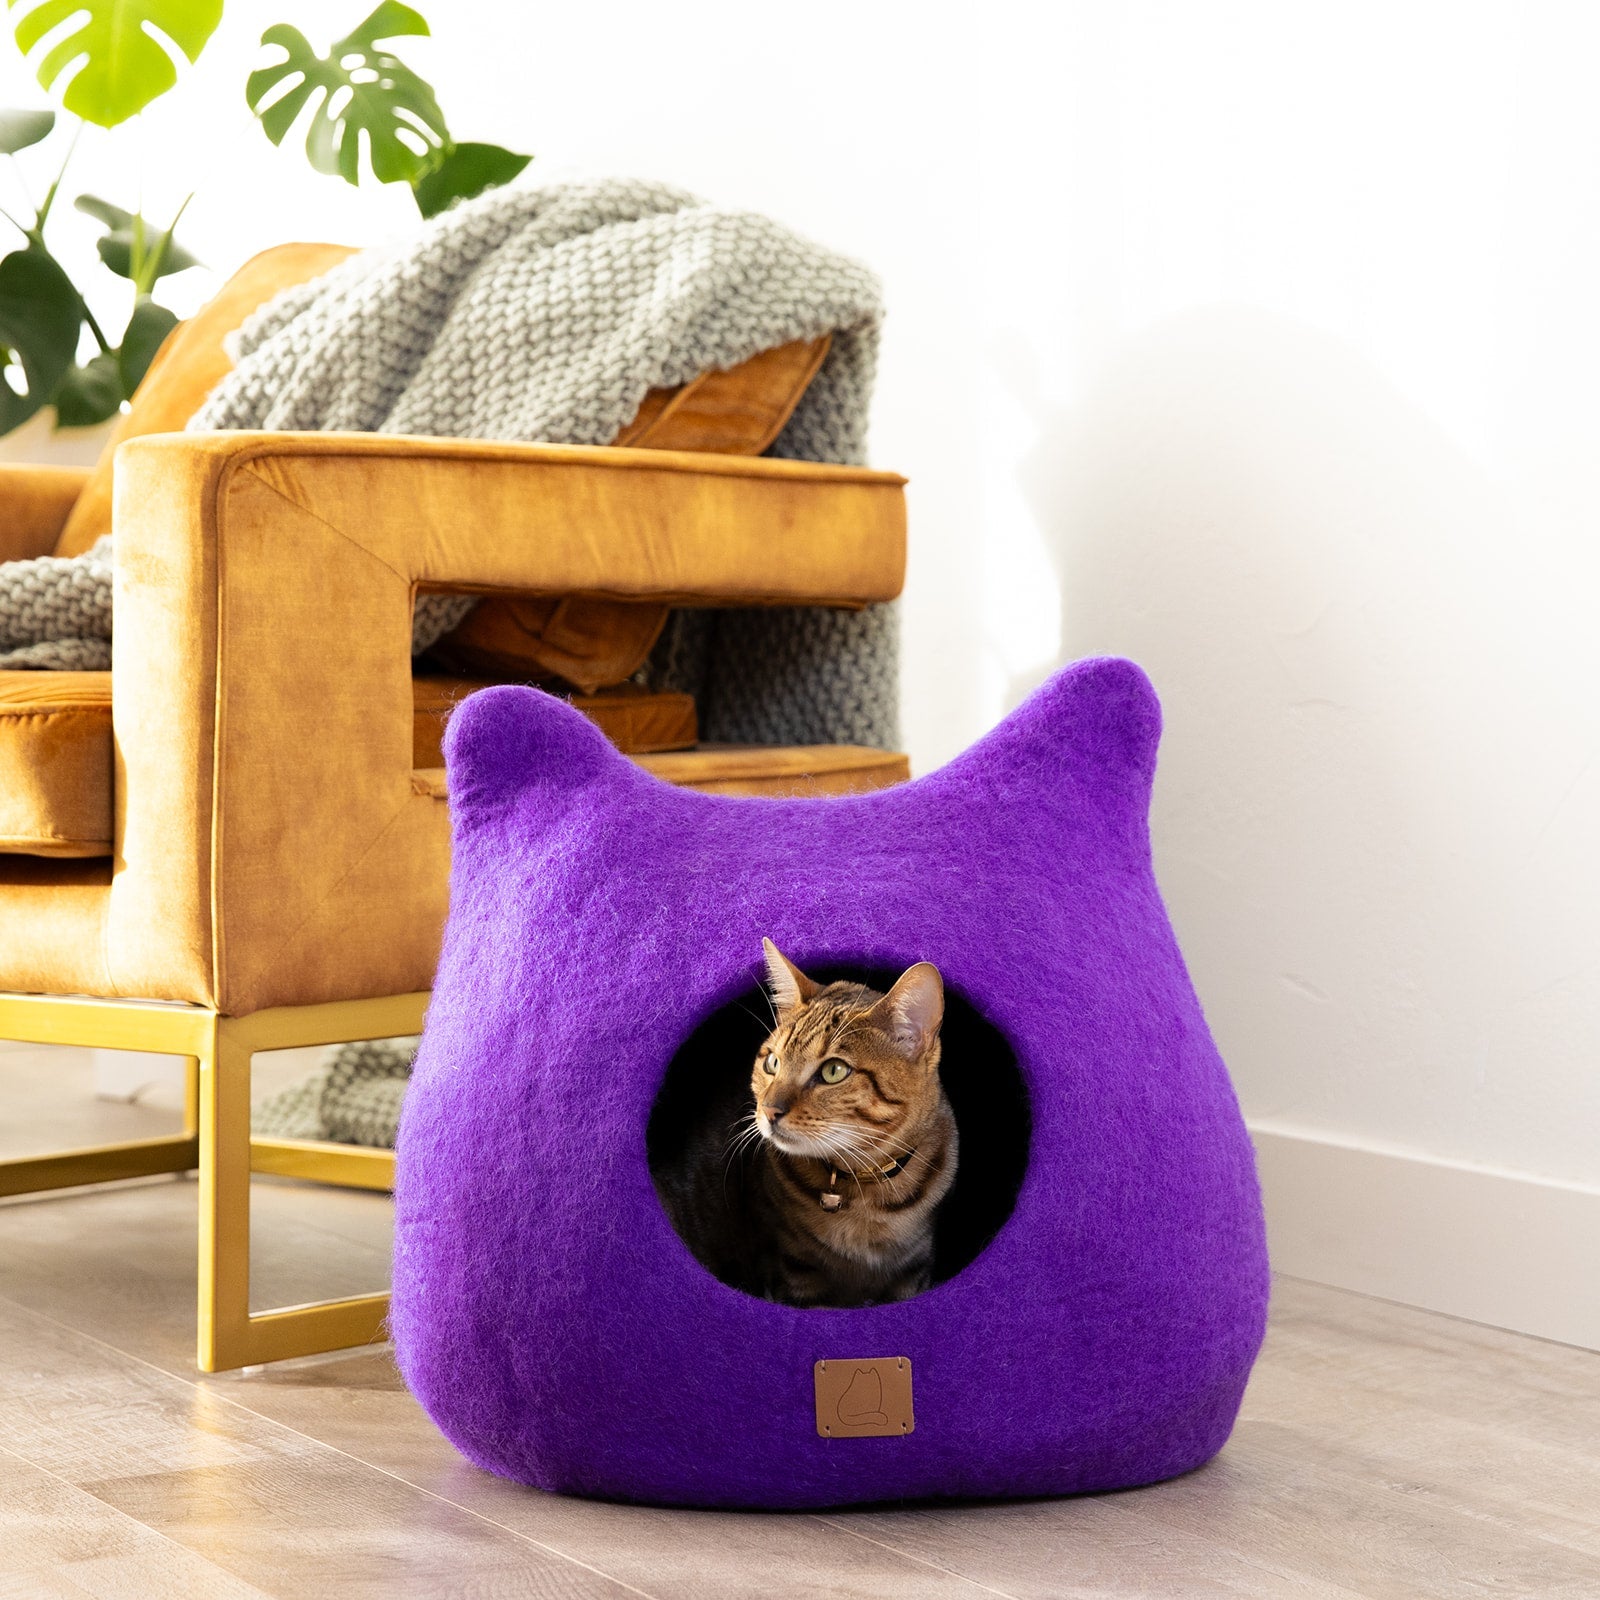 Whimsical Cat Ear Cave Bed - Felted Wool Hideout for Playful Kitties -